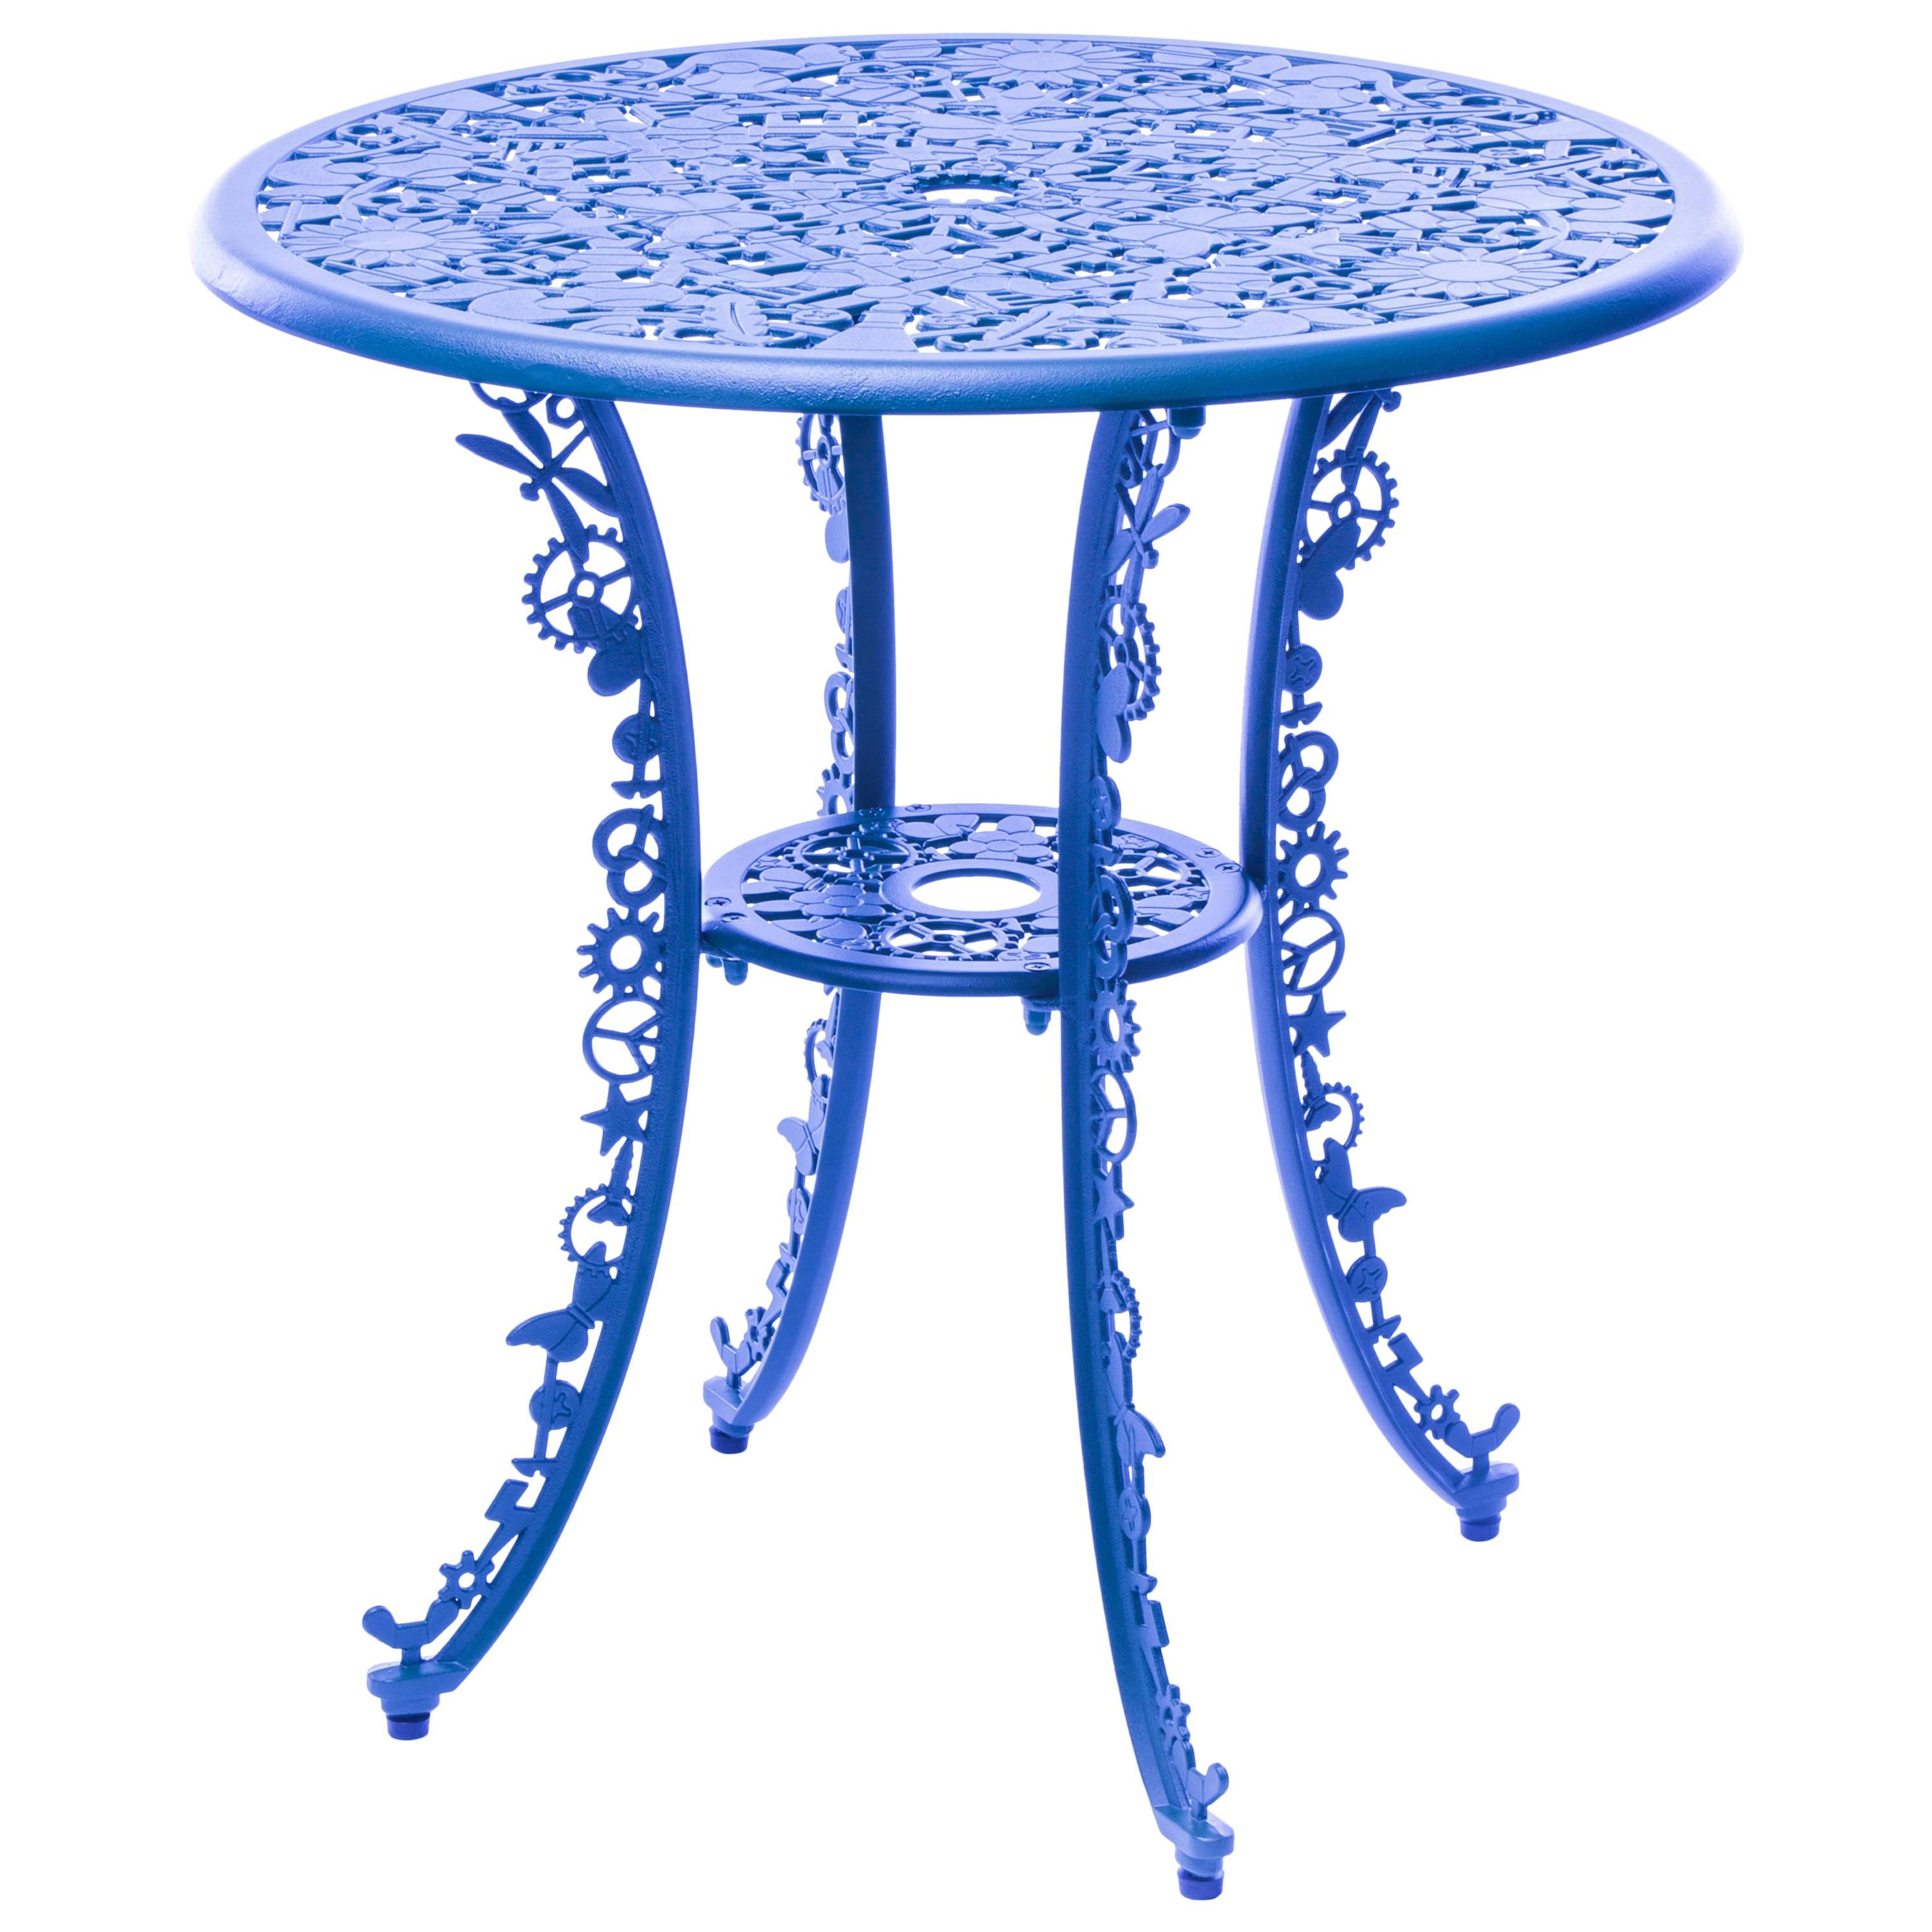 Aluminum Table "Industry Garden Furniture" by Seletti, Sky Blue